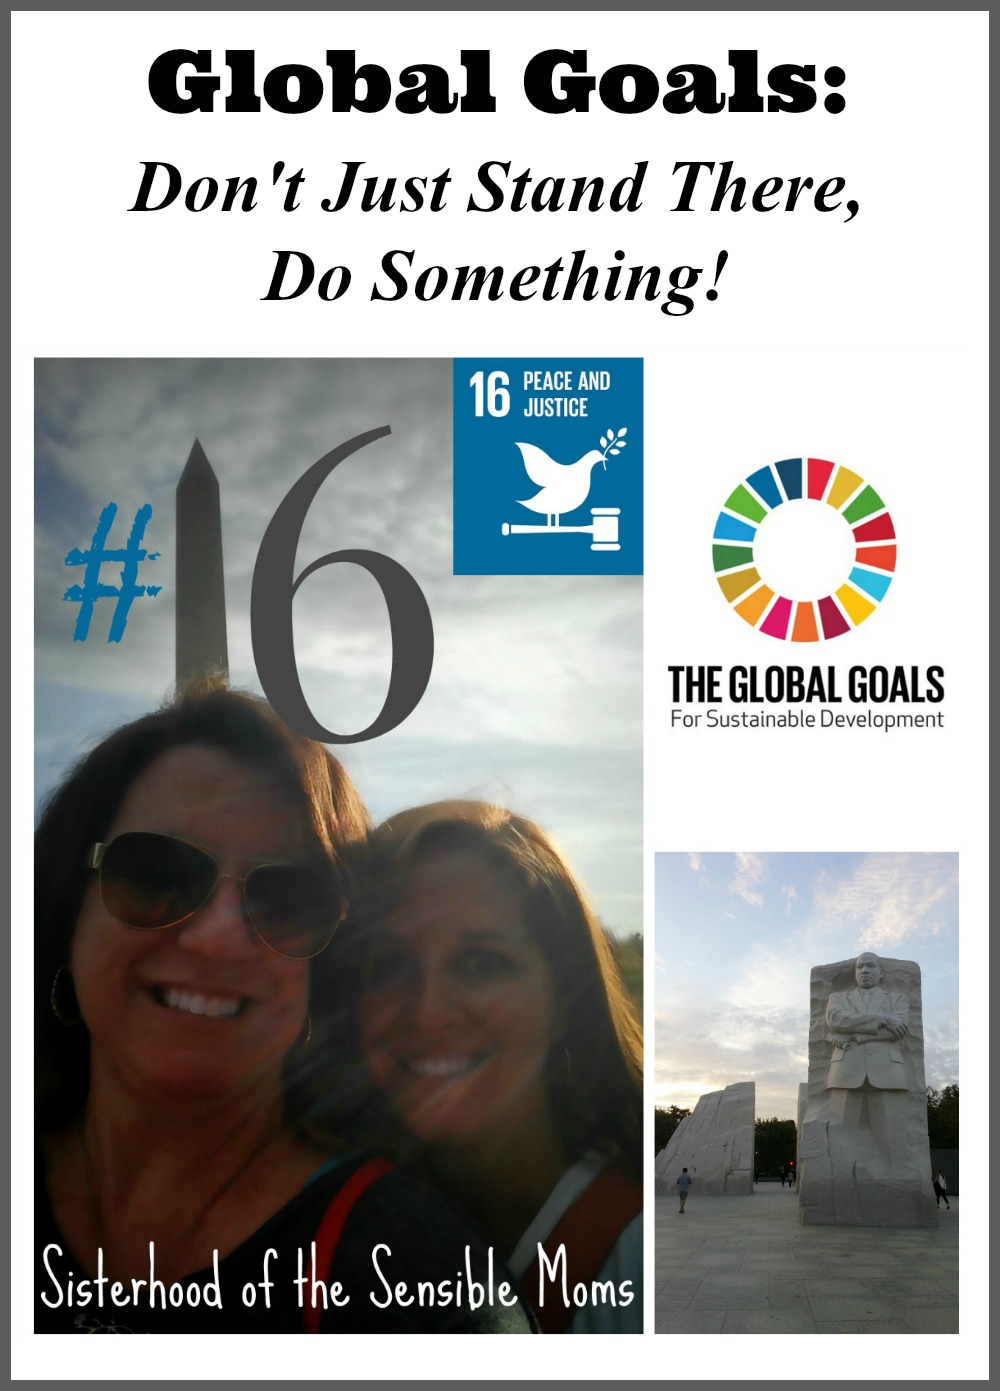 Global Goals: Don't just stand there, do something! We are all parenting with one eye on the future. Find inspiration from the United Nations Global Goals. Be a part of the change happening. #TellEveryone | Sisterhood of the Sensible Moms